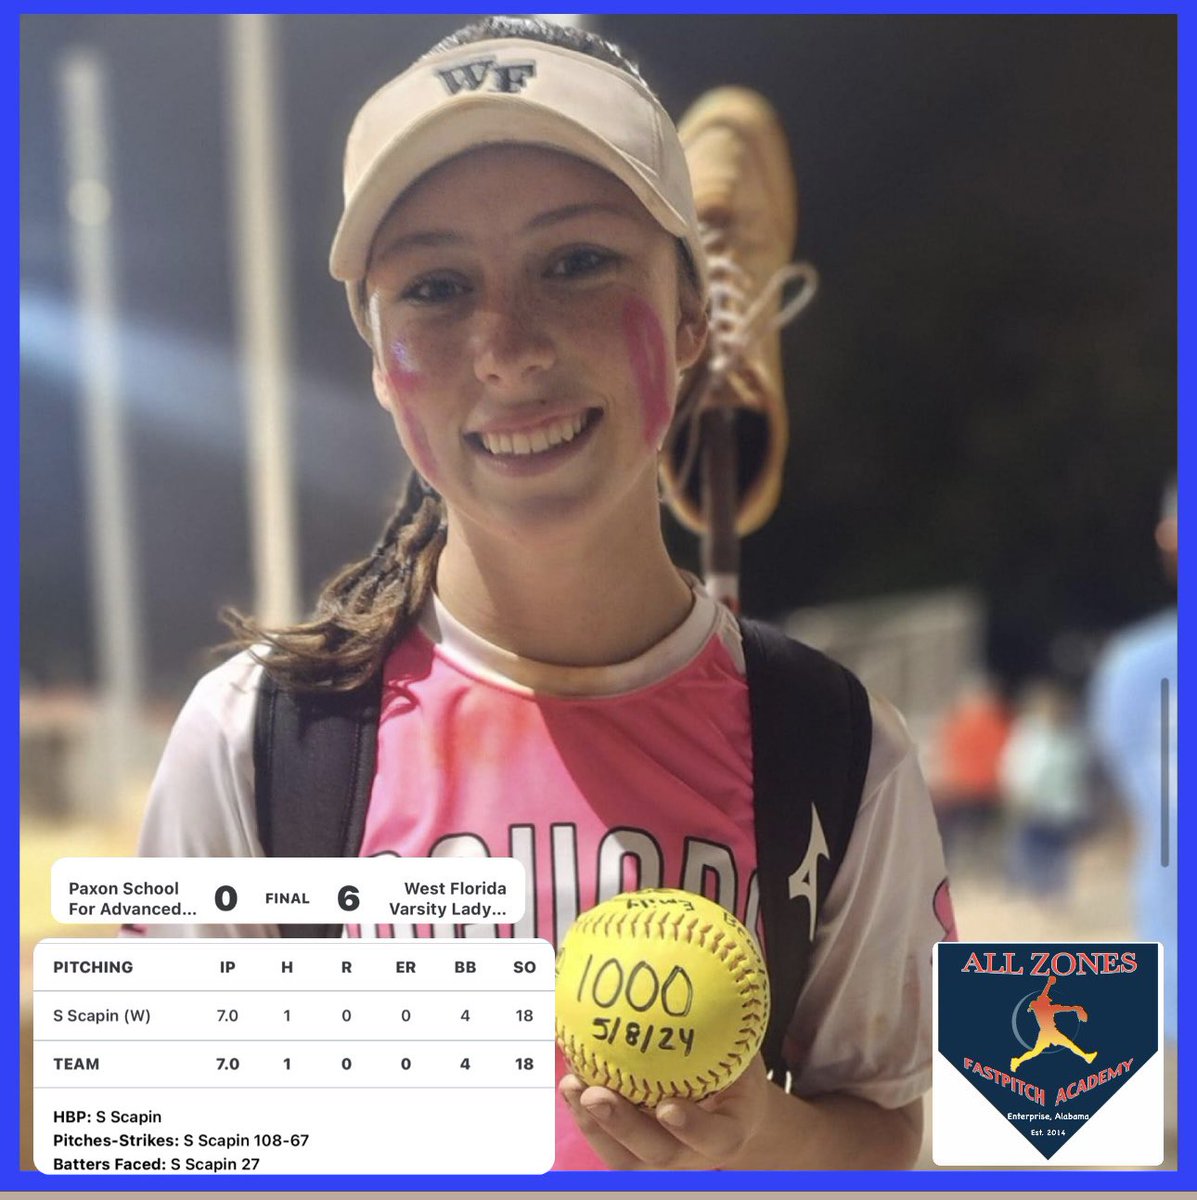 1000 High School Career Strikeouts.. Congratulations to Sydney Scapin (2024 - South Alabama Signed) on this amazing achievement. Pitched a gem last night for West Florida Jags to keep their post season going also. Congrats Syd and keep spinning it. @ScapinSydney